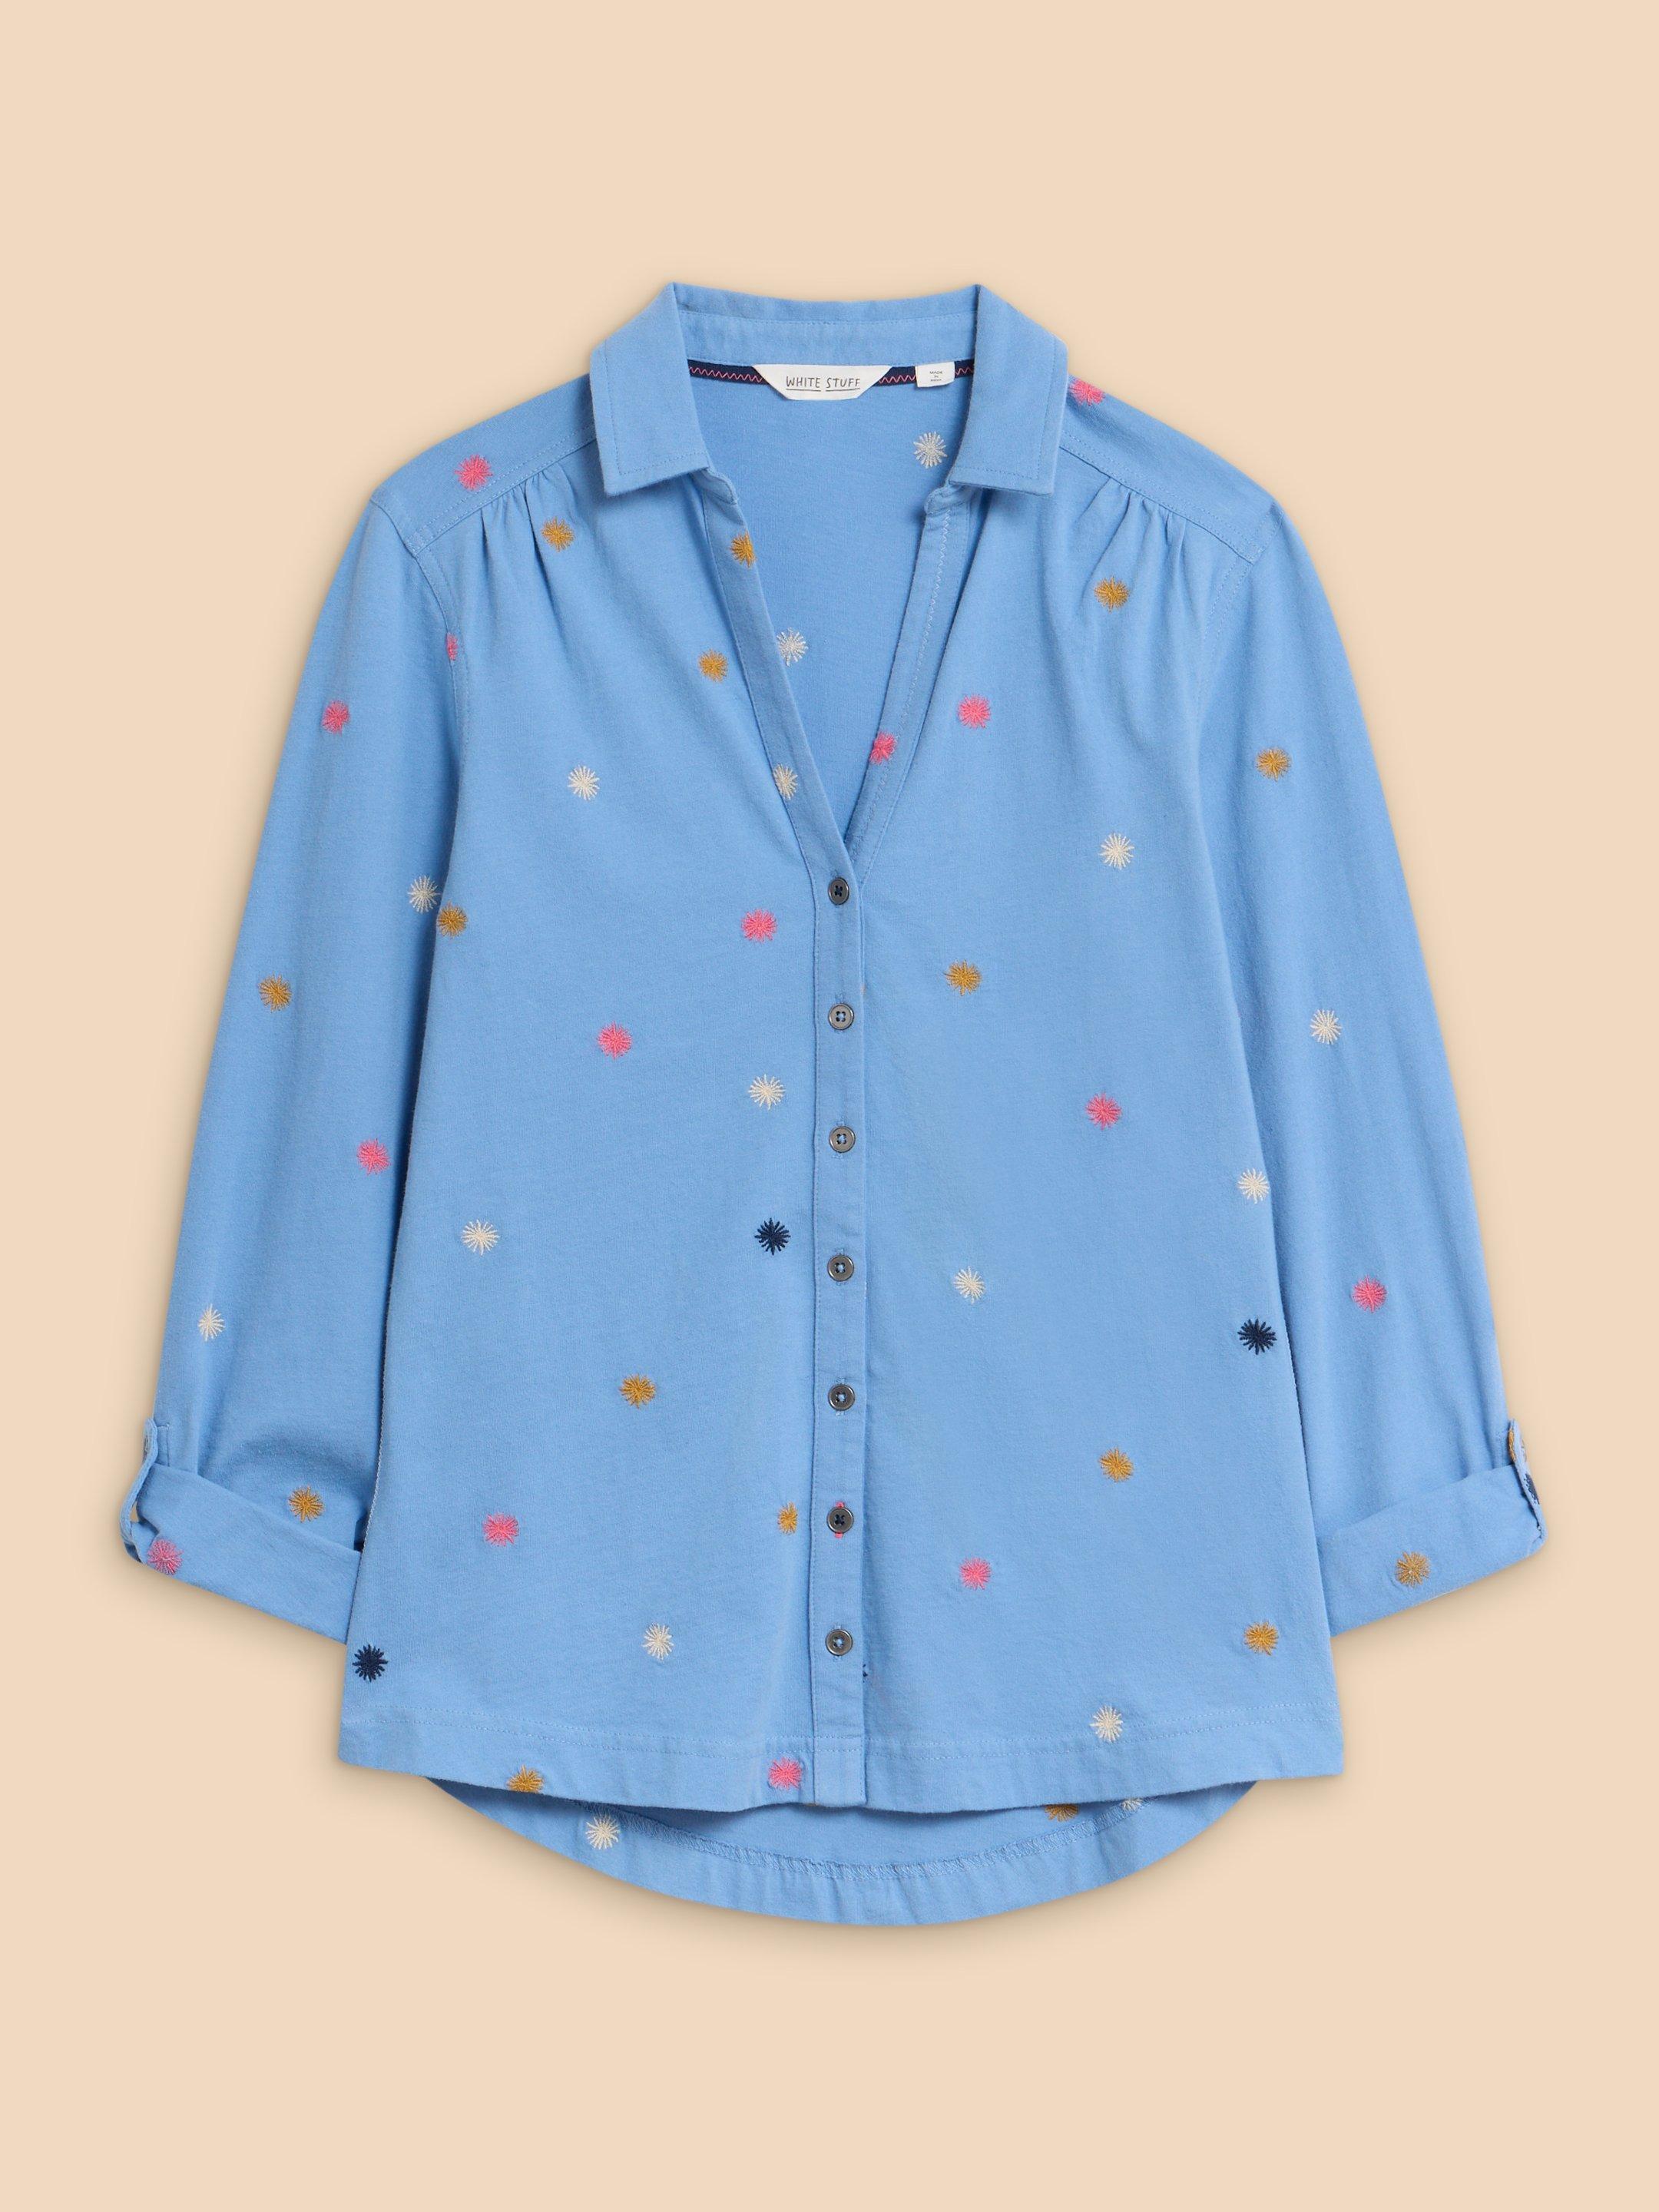 ANNIE JERSEY EMBROIDERED SHIRT in BLUE MLT - FLAT FRONT